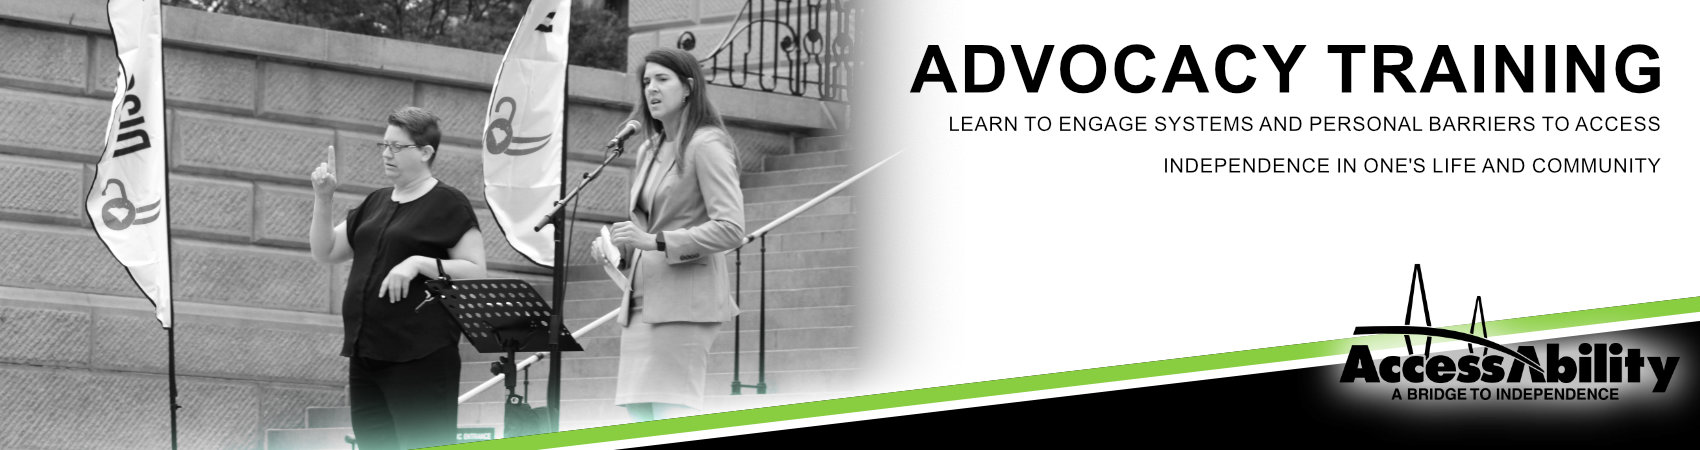 [Advocacy Training. Learn to engage systems and personal barriers to access Independence in one's life and community] -insert photo descriptive here-. Accent colors of green, white, and black with the AccessAbility logo are in the bottom right corner.